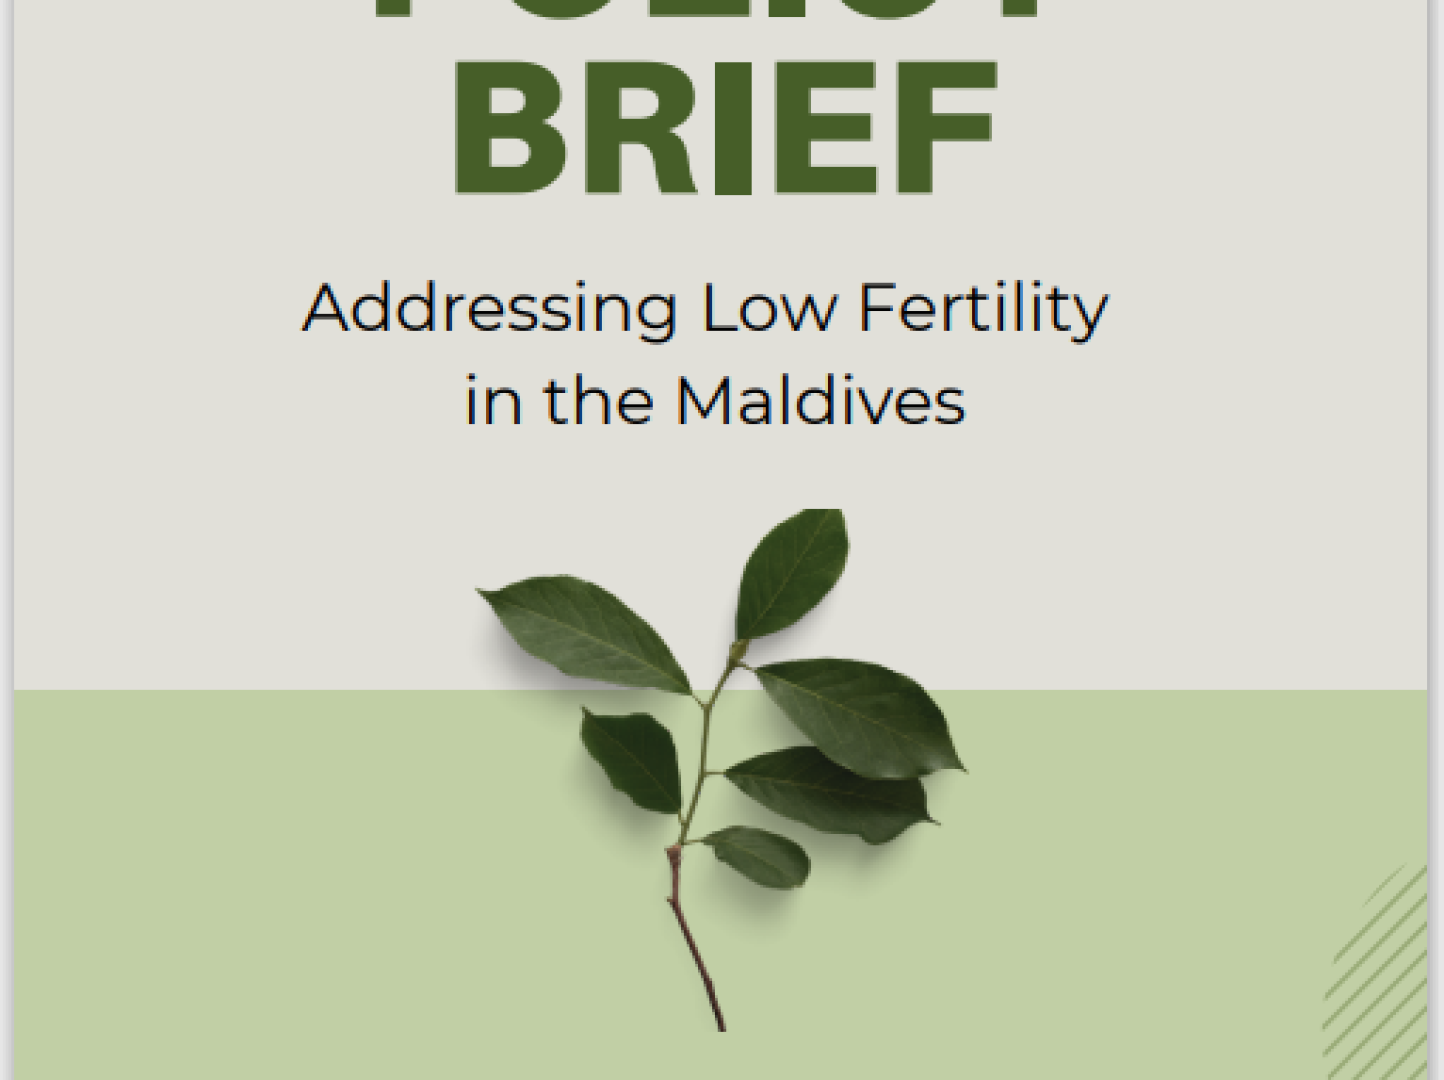 Policy Brief: Addressing Low Fertility in the Maldives